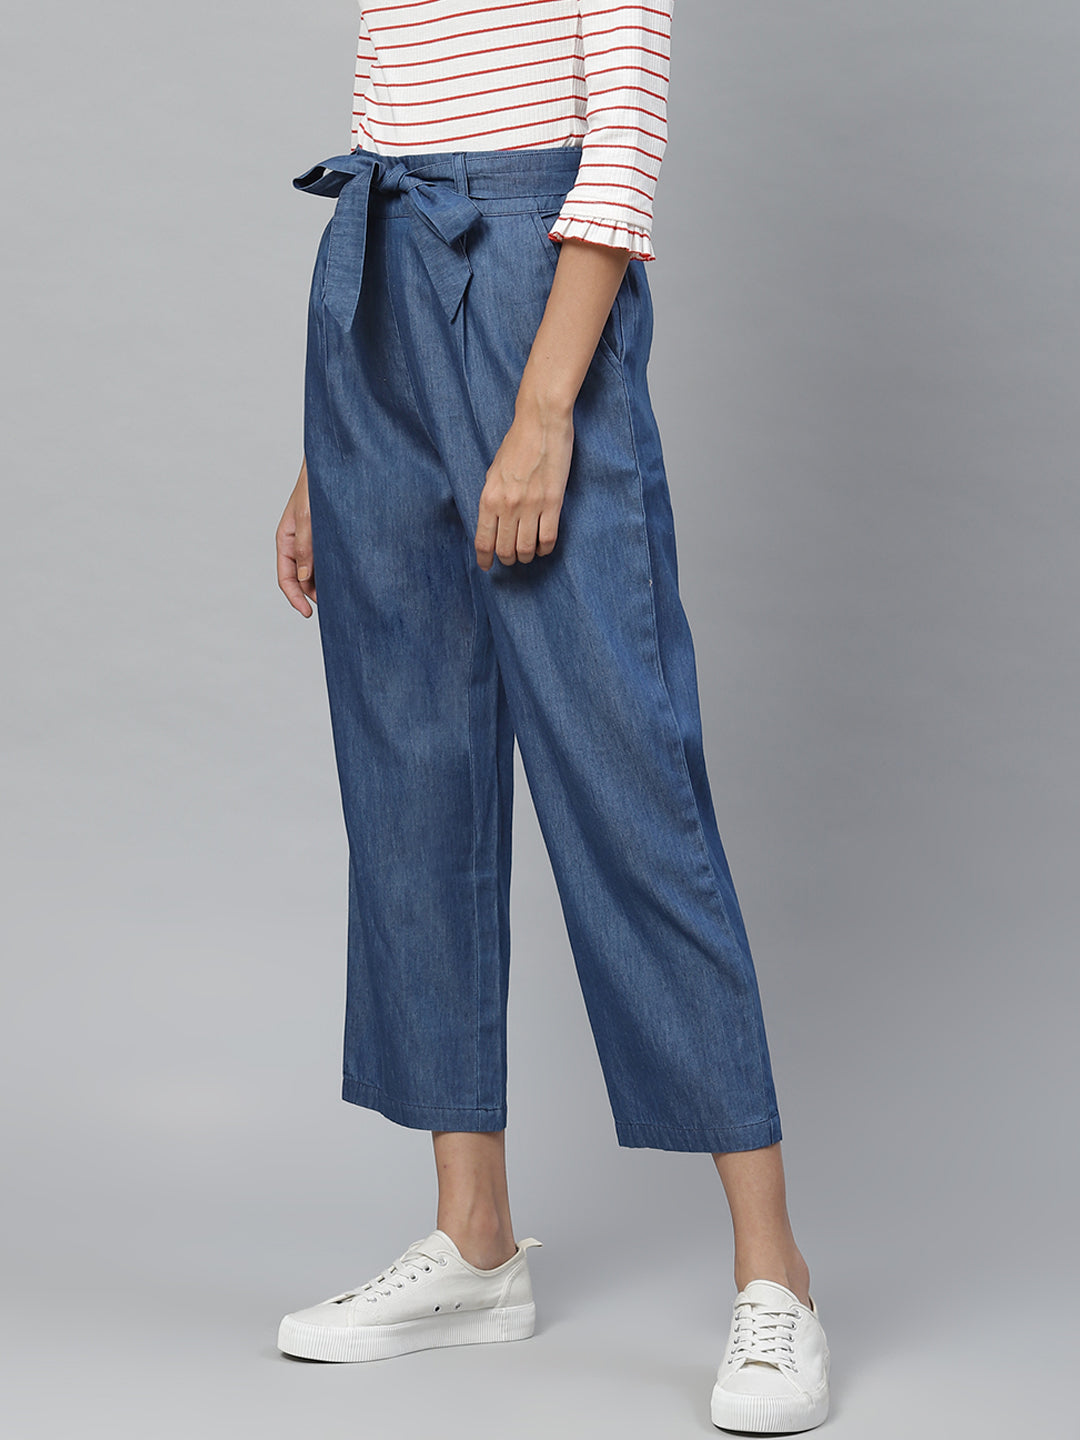 Korean Retro Womens Denim Blue Trousers Women With Small Waist And Light  Blue Tie High Loose Casual Wide Leg Pants From Fourforme, $18.28 |  DHgate.Com